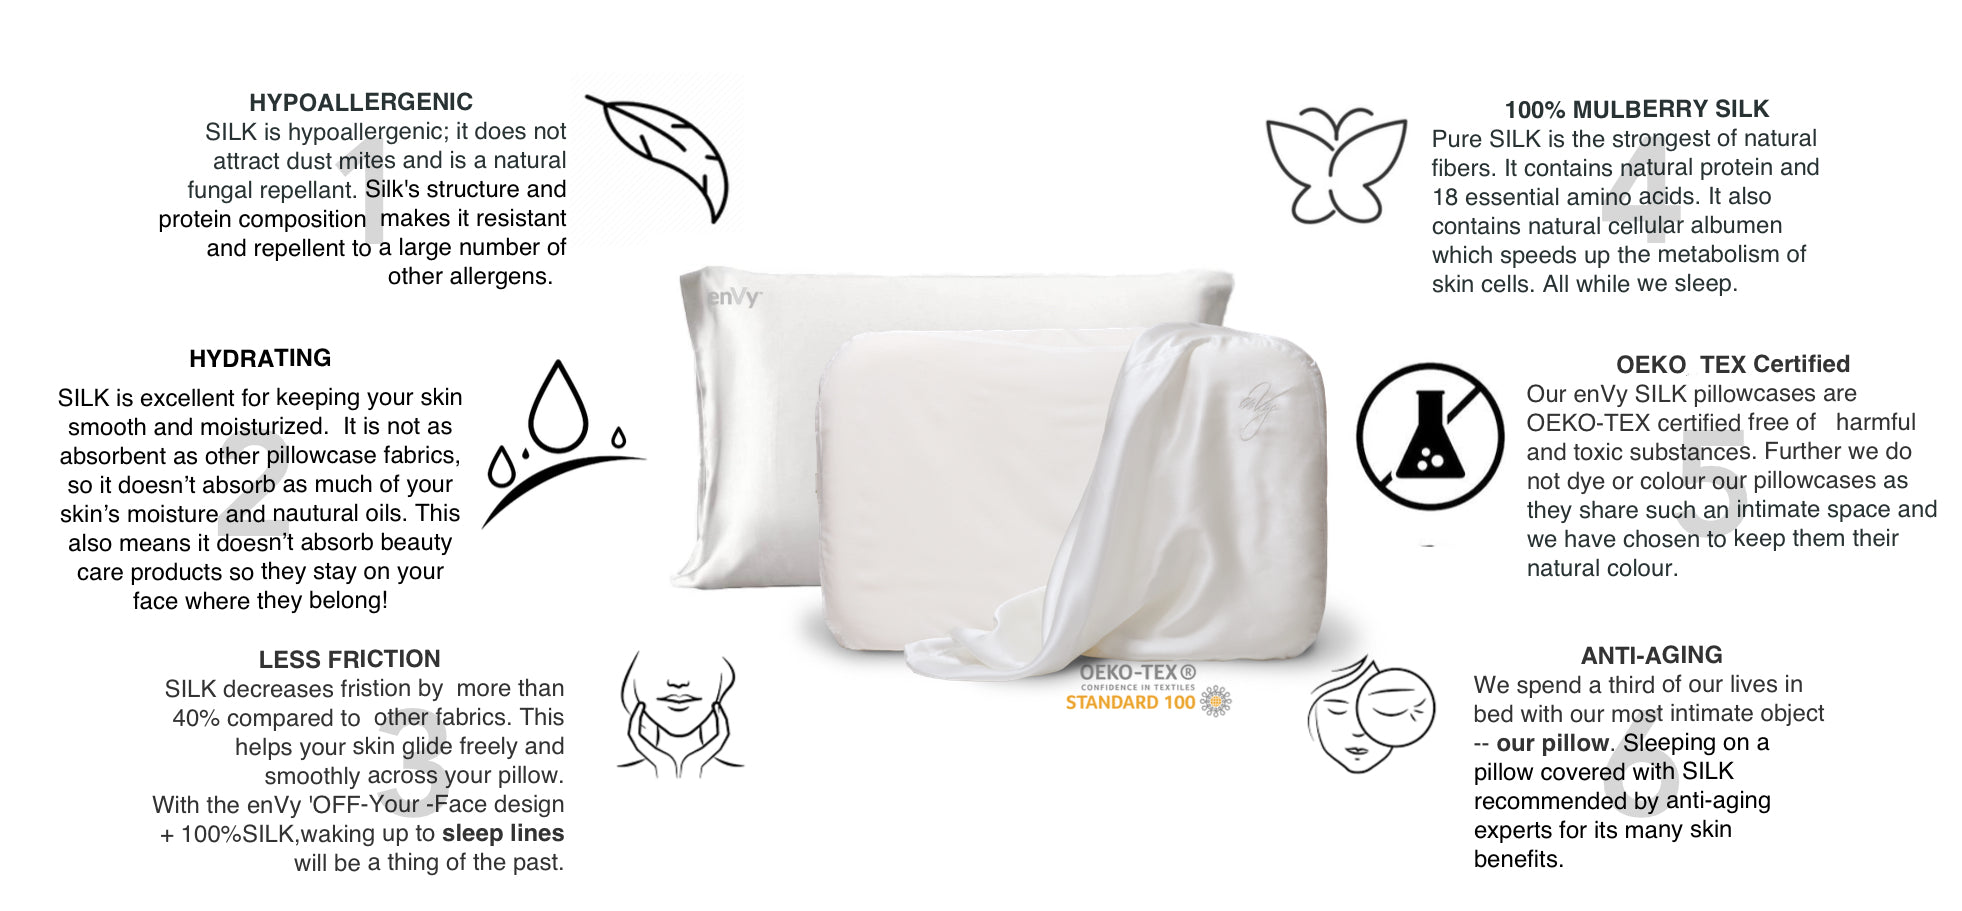 COPPER-infused pure SILK Pillowcases by enVy™ – enVy Pillow Canada